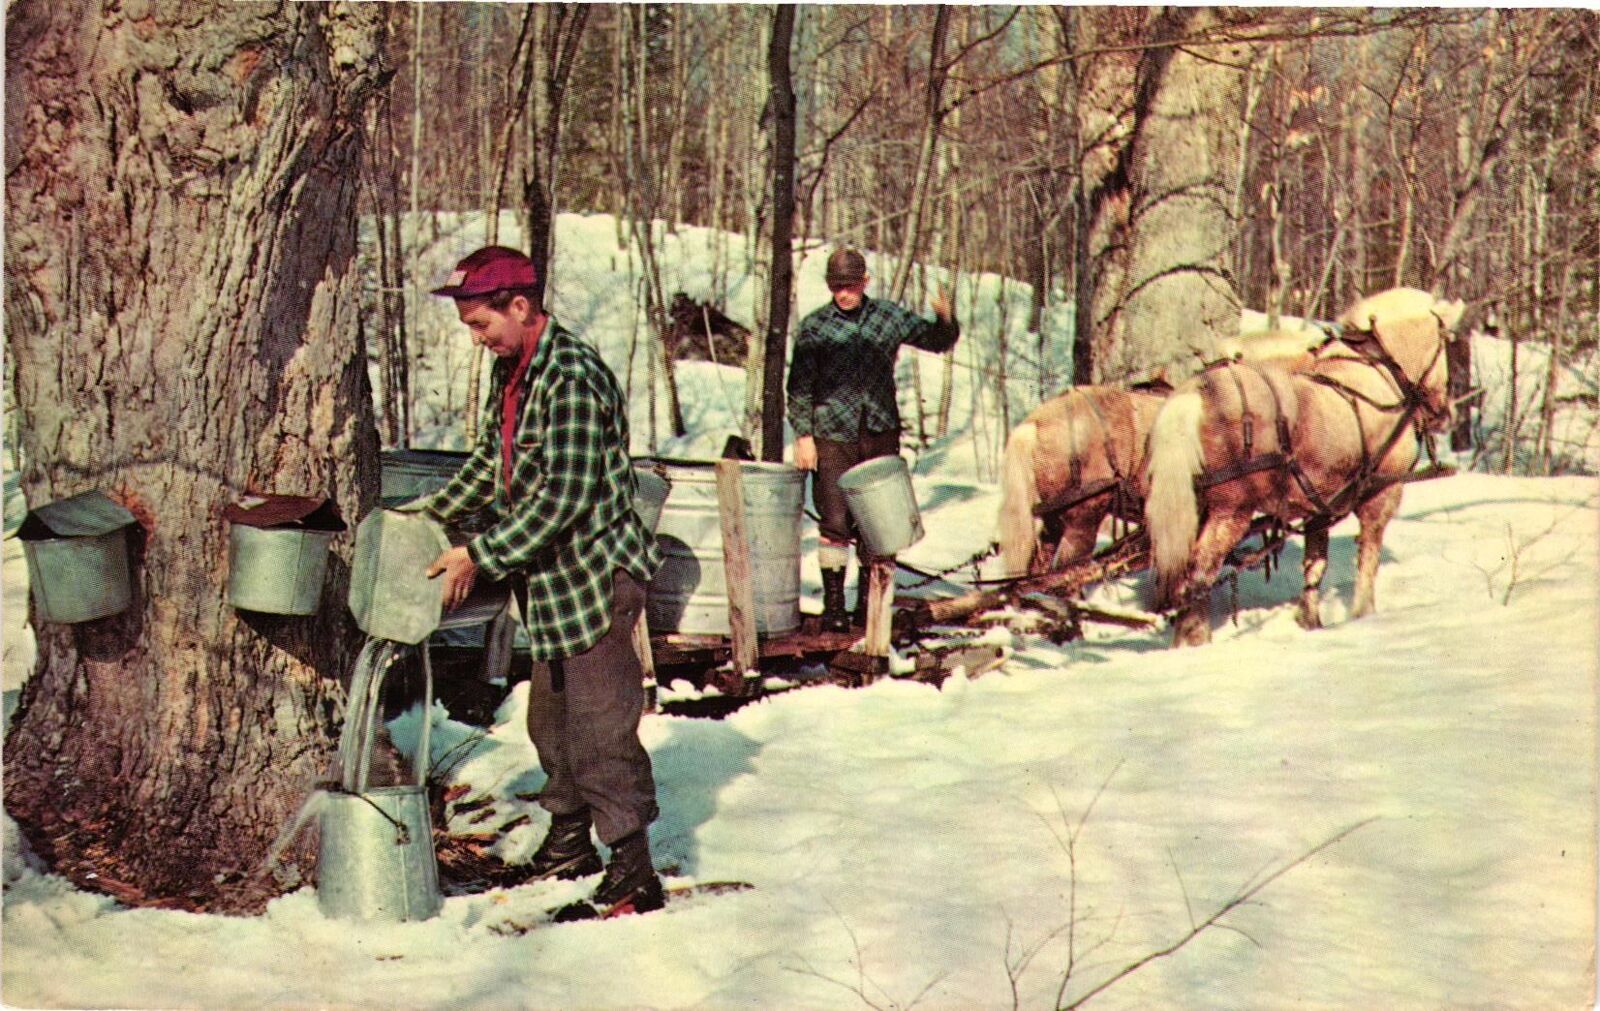 Vintage Postcard- Gathering maple sap from trees. 1960s